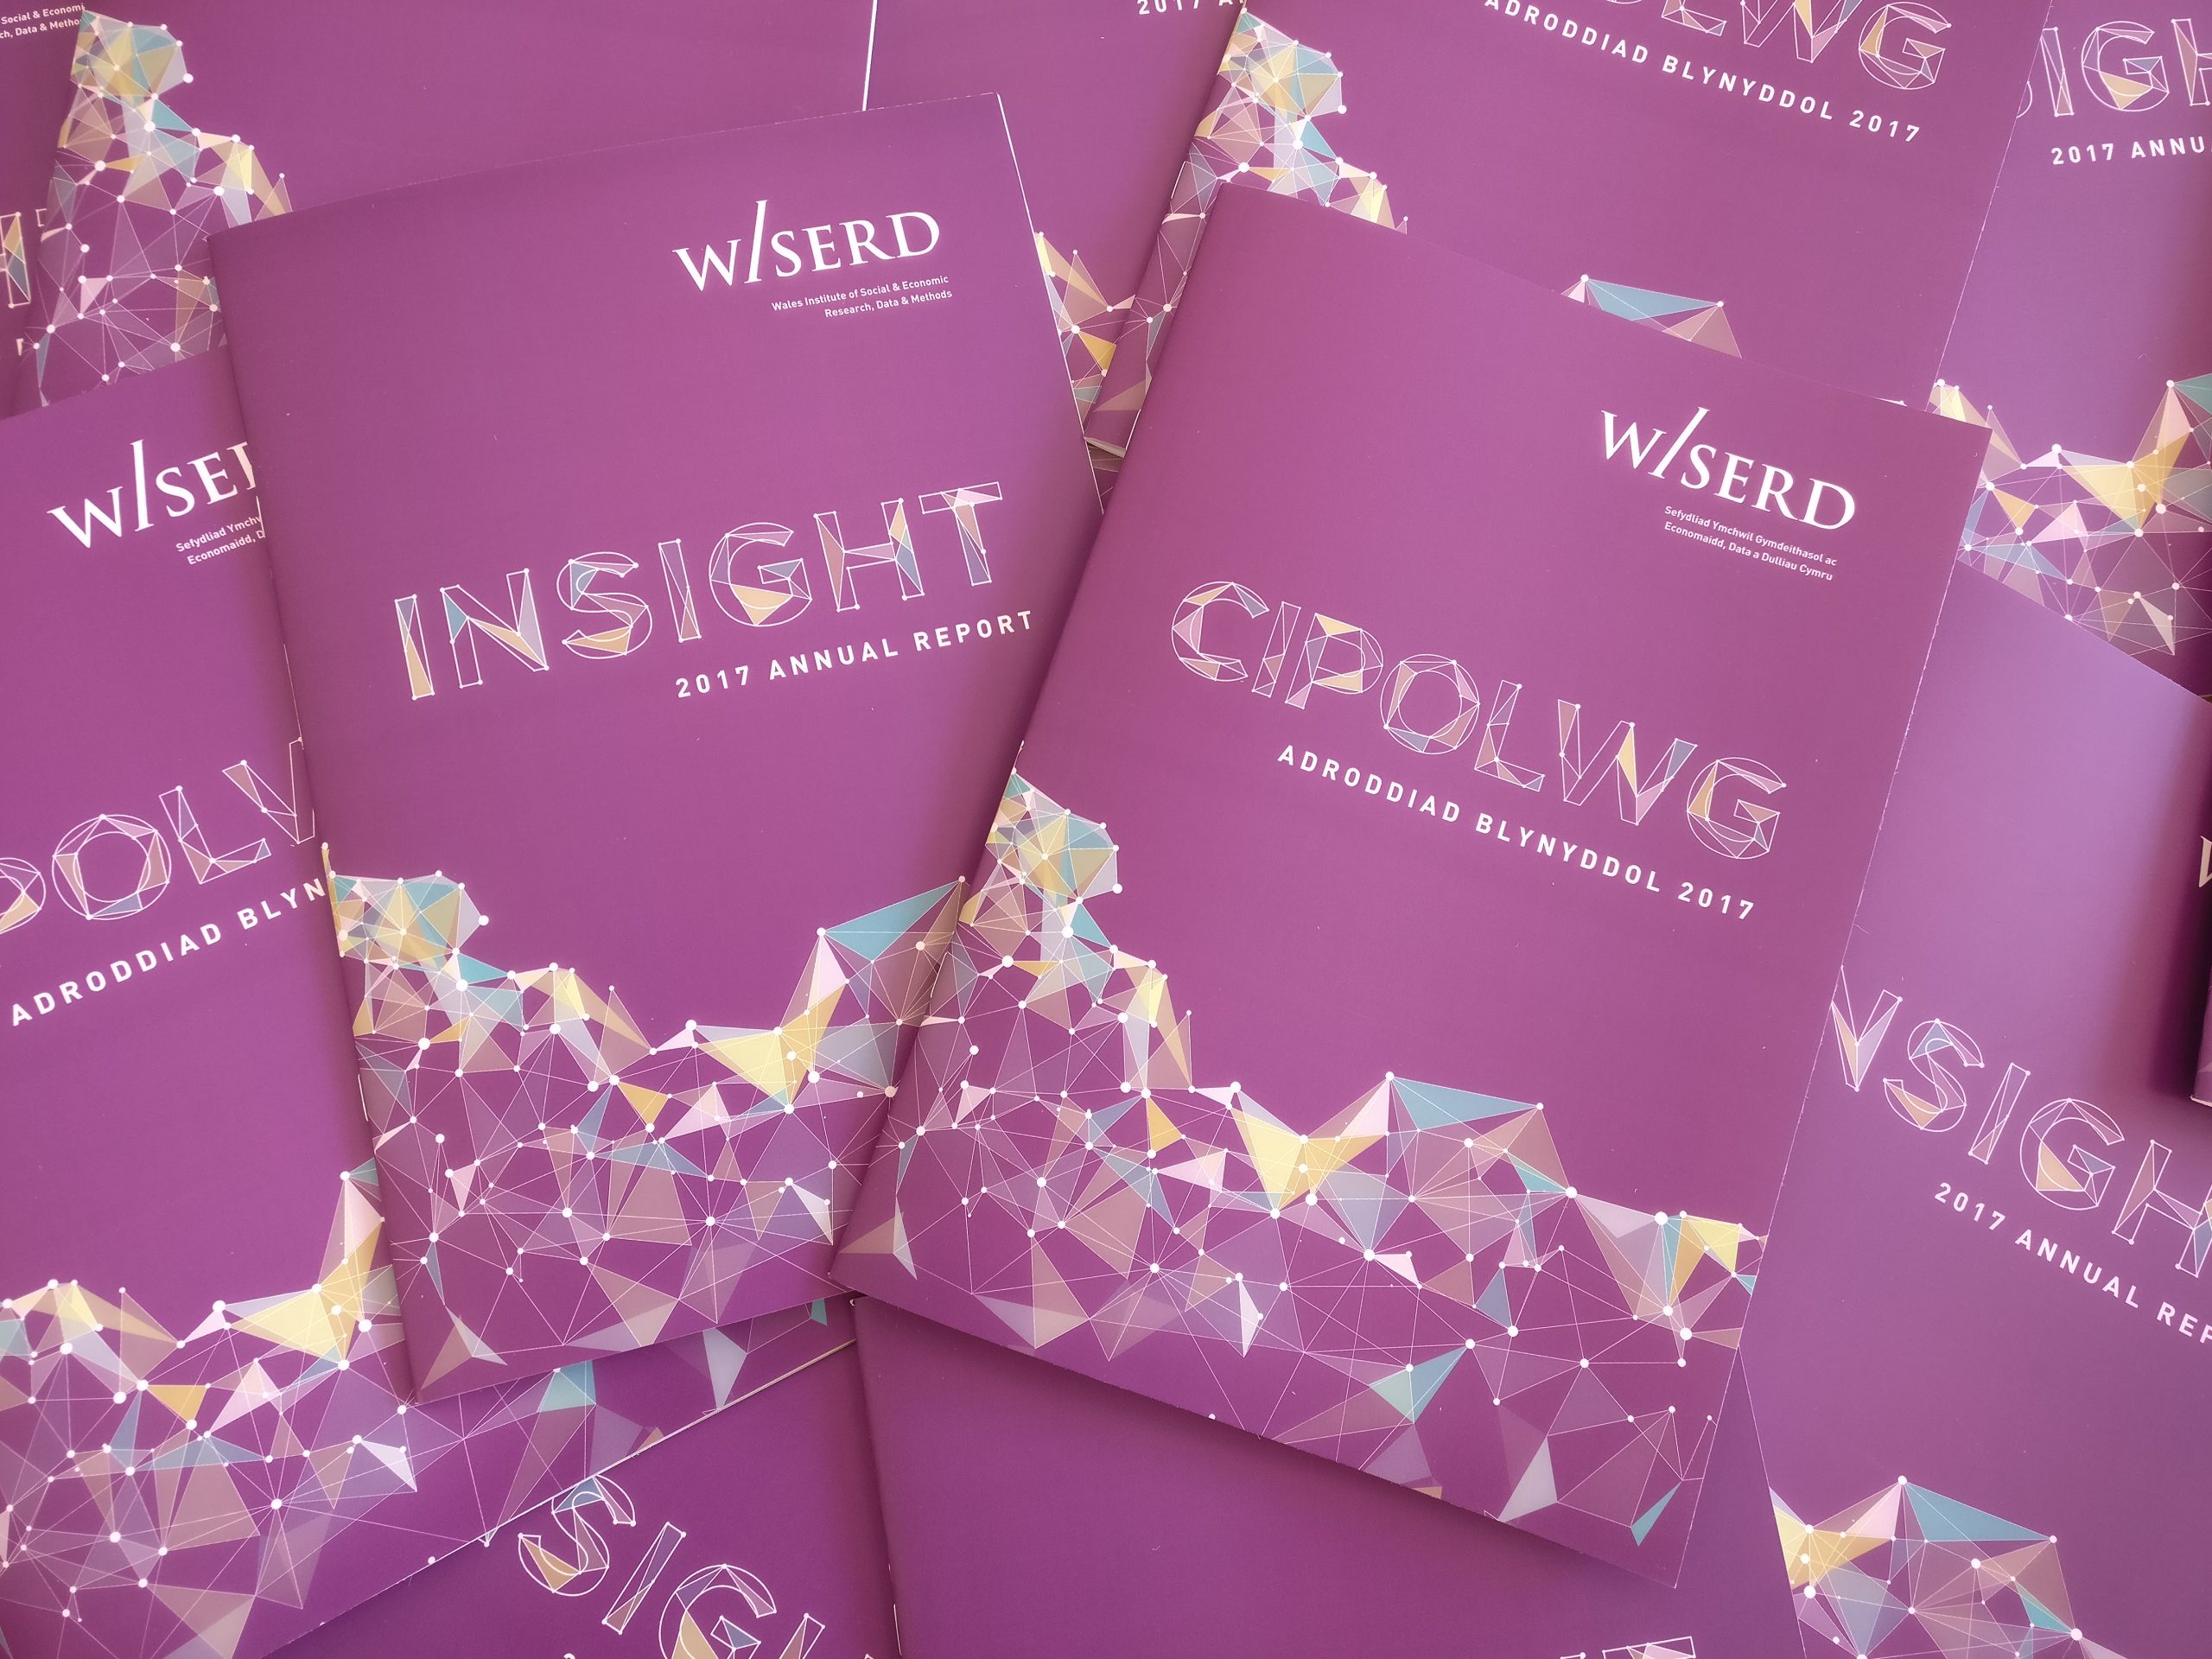 Several copies of WISERD Insight